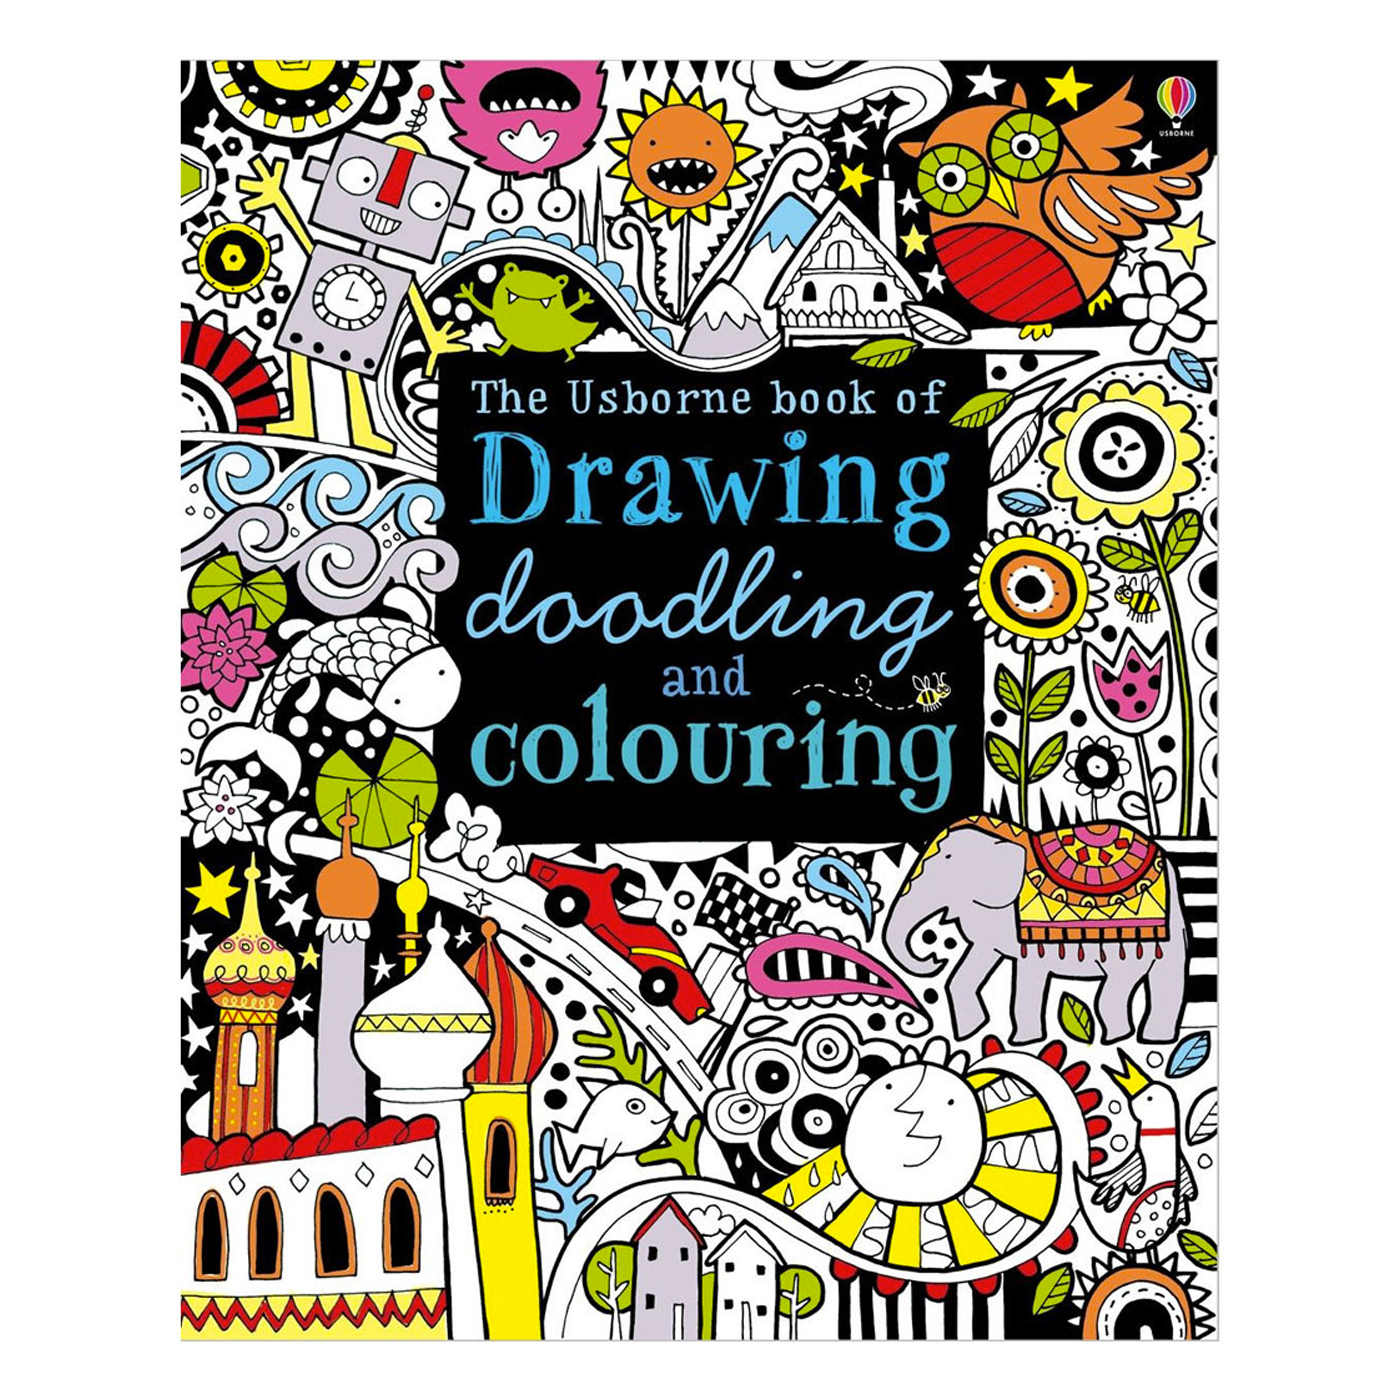  Drawing Doodling and Colouring Book